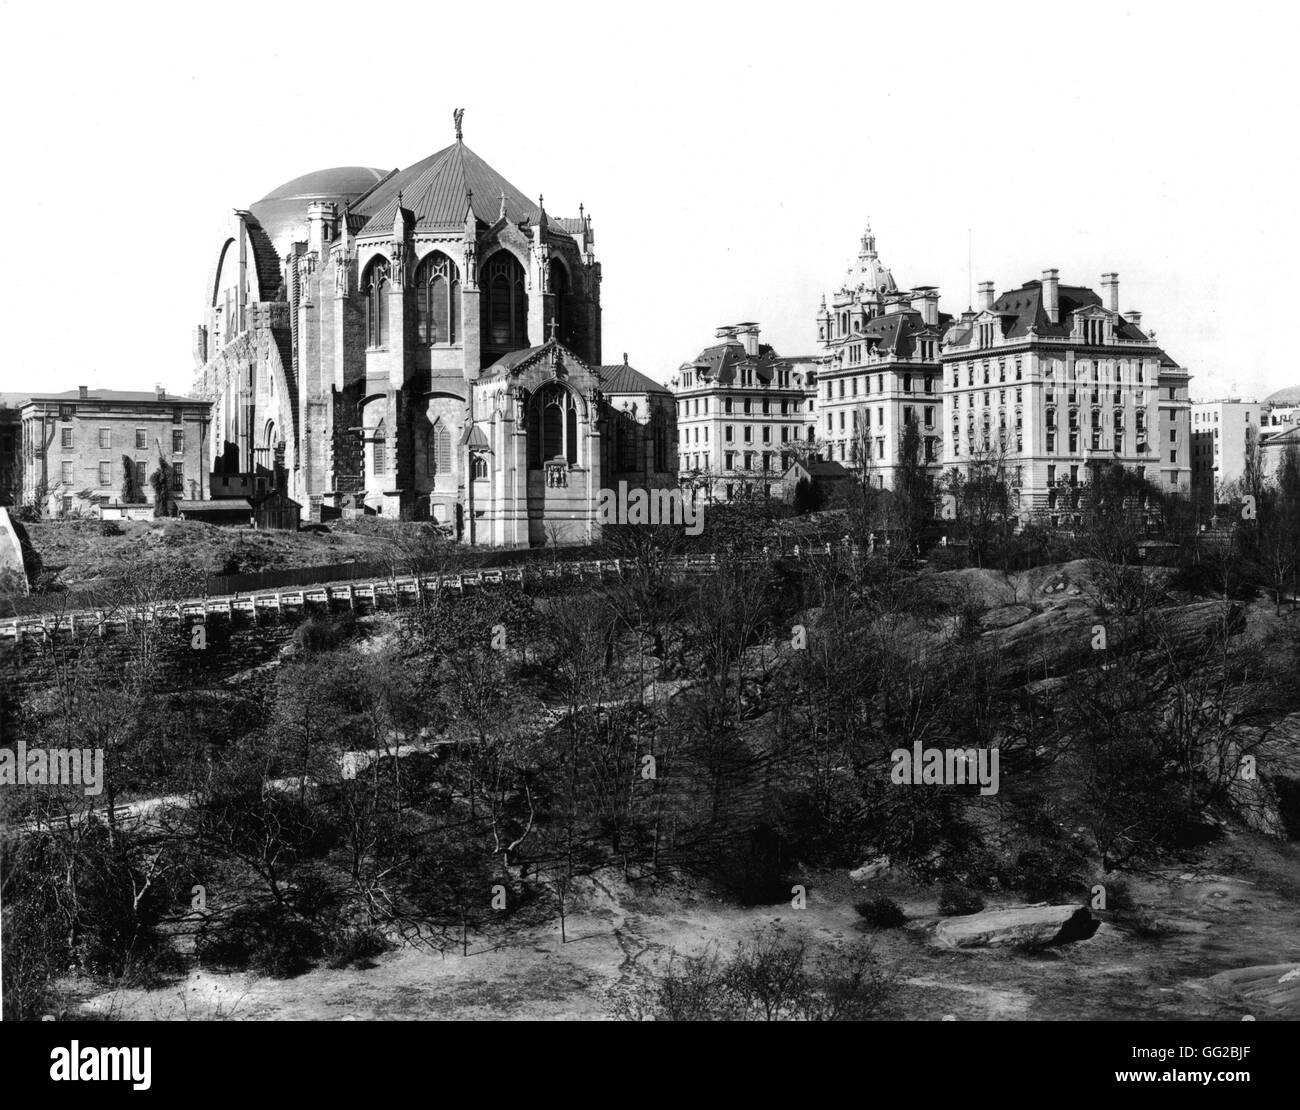 New York. Cathedral 'St. John the Divine' and hospital St. Lukes. Photograph by Irvin Underhill 1910 United States Washington. Library of Congress Stock Photo